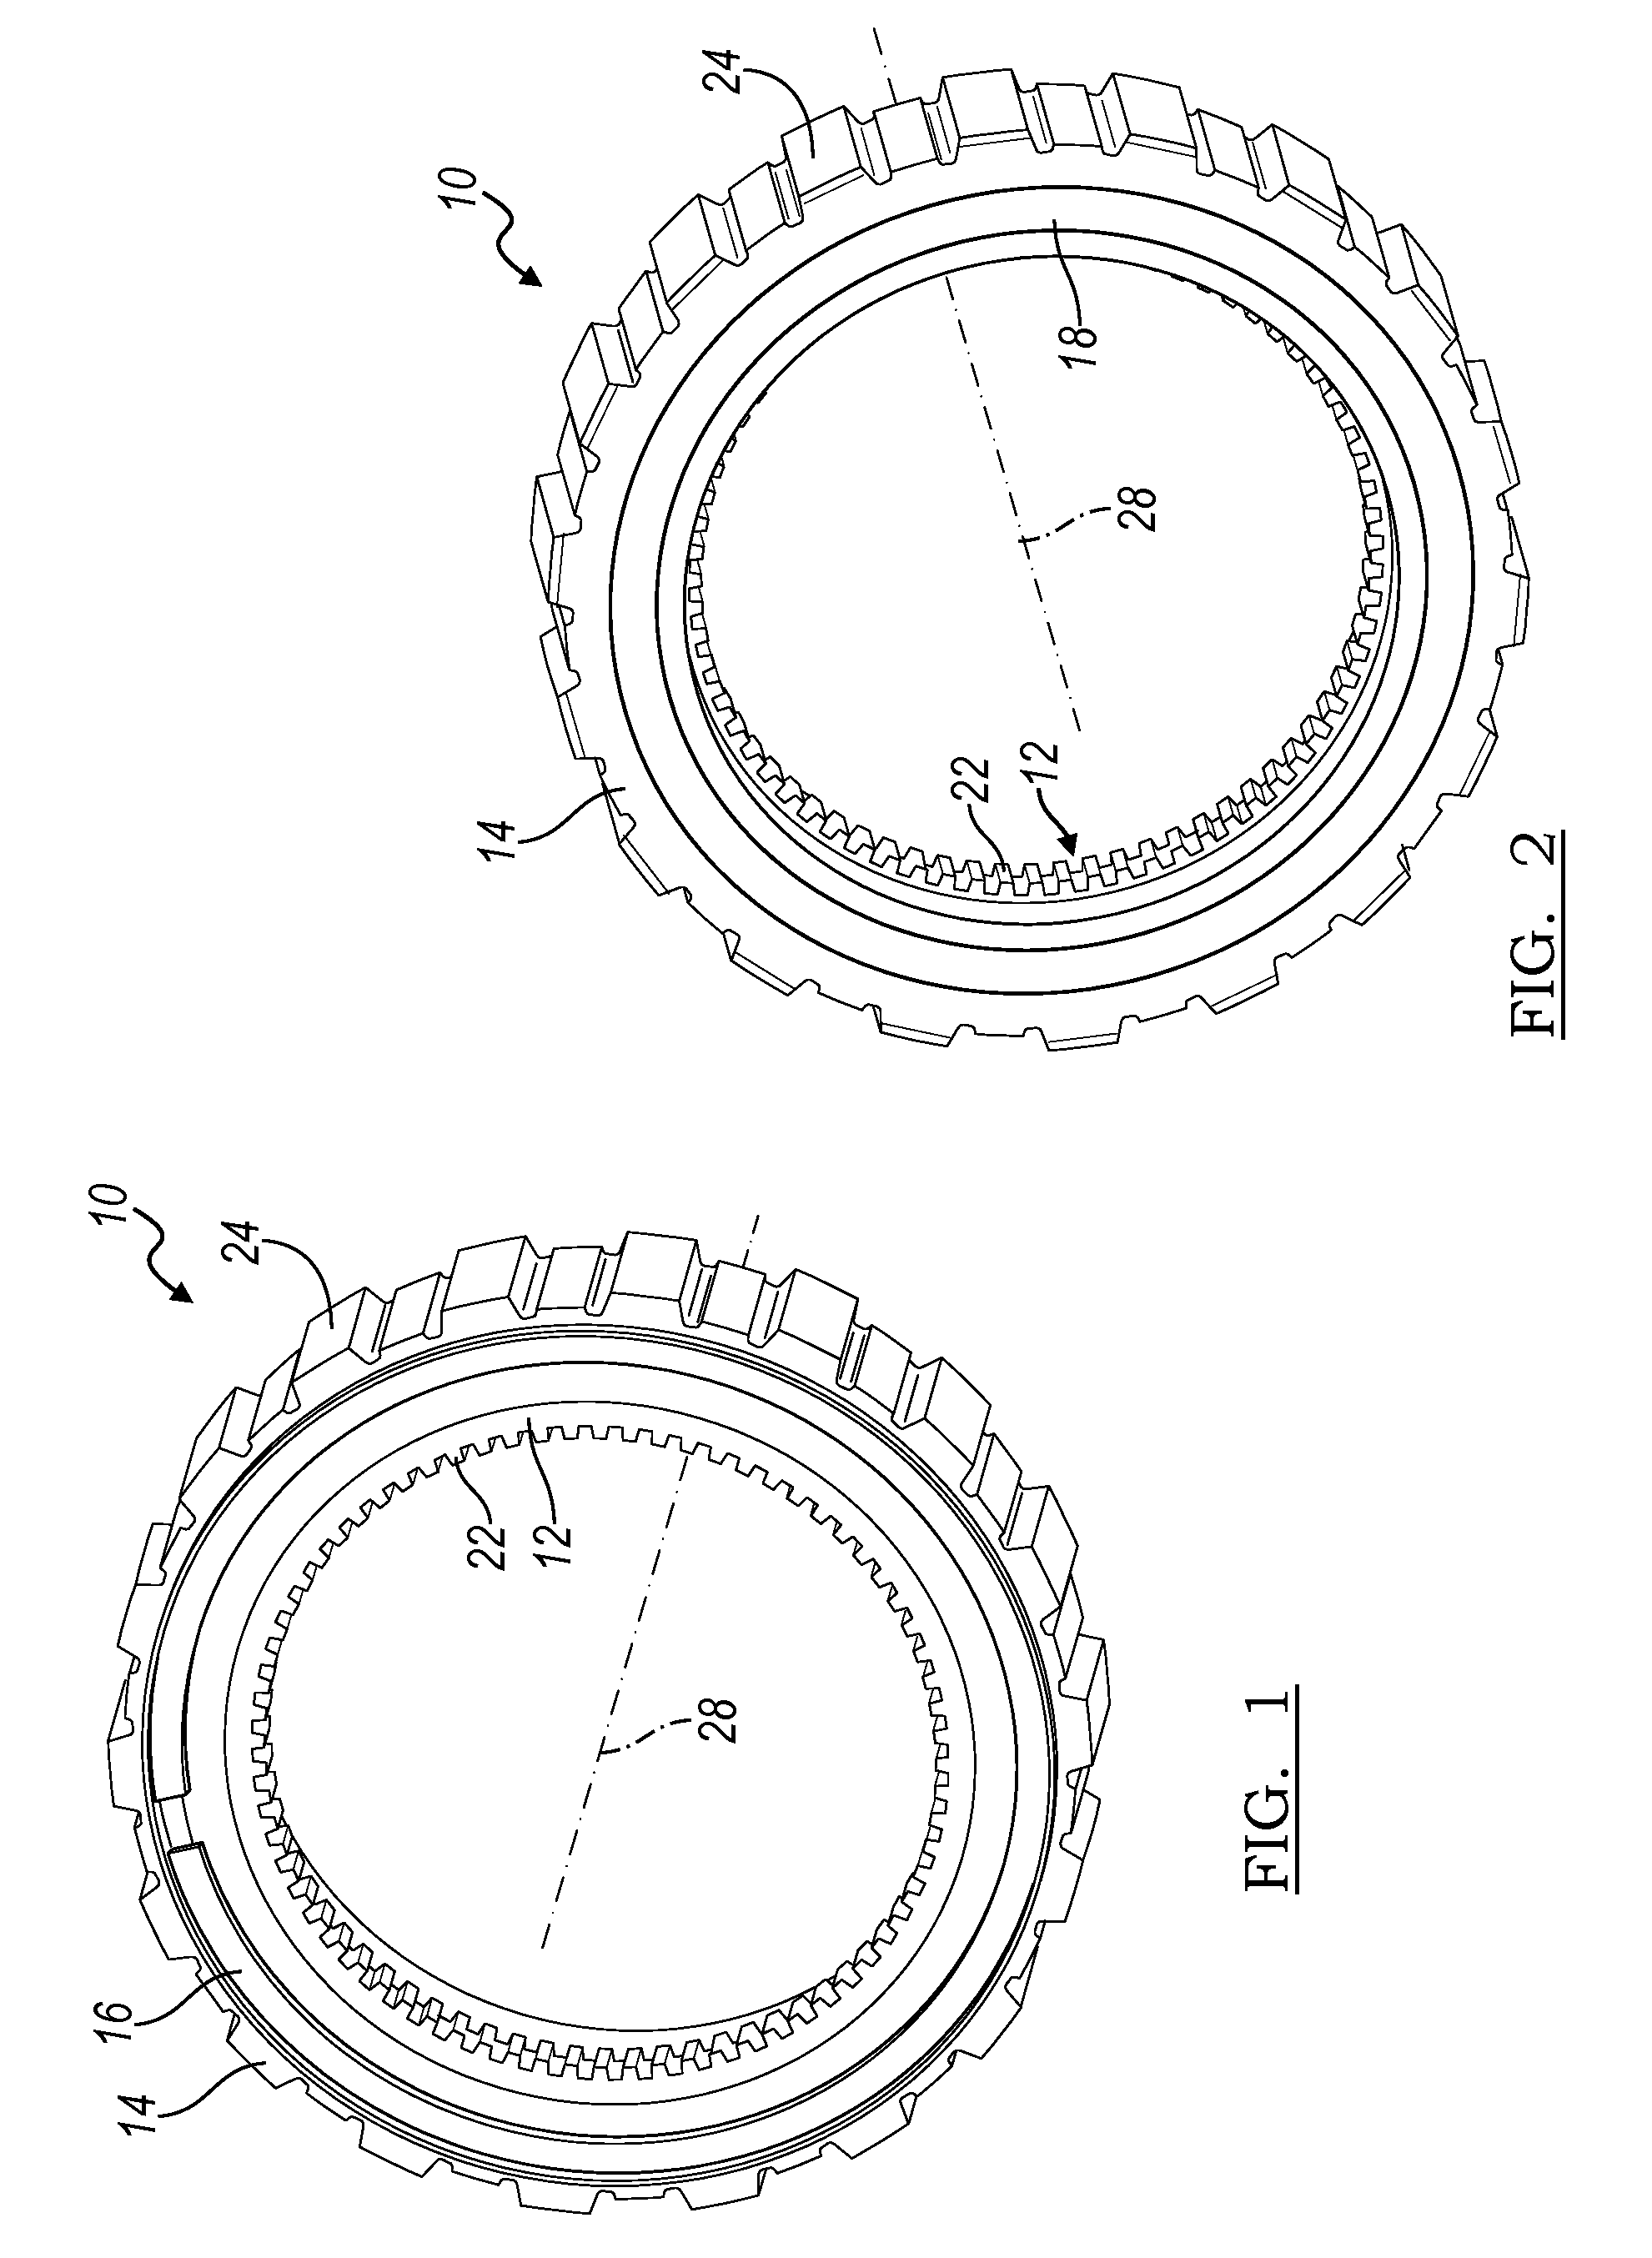 Magnetically actuated mechanical diode